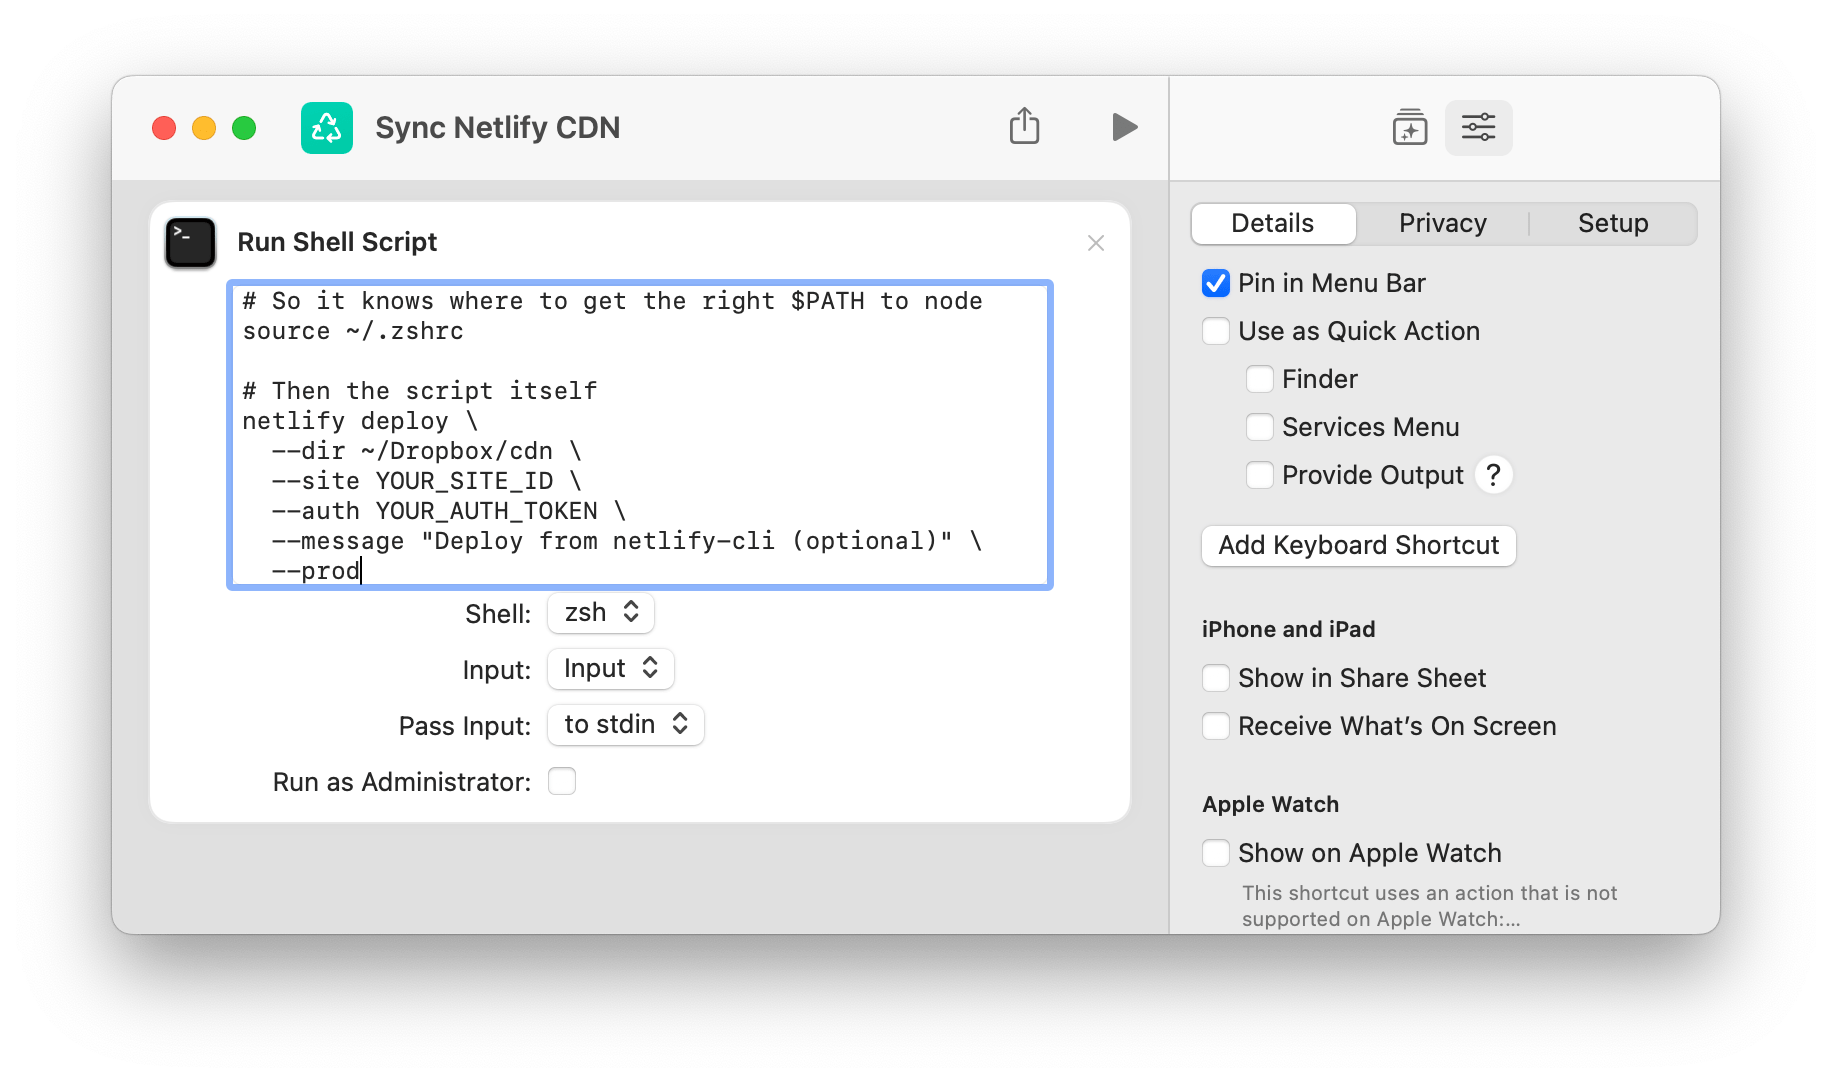 Screenshot of a Shortcut in macOS running a shell script to sync a local folder to Netlify using the netlify CLI command.